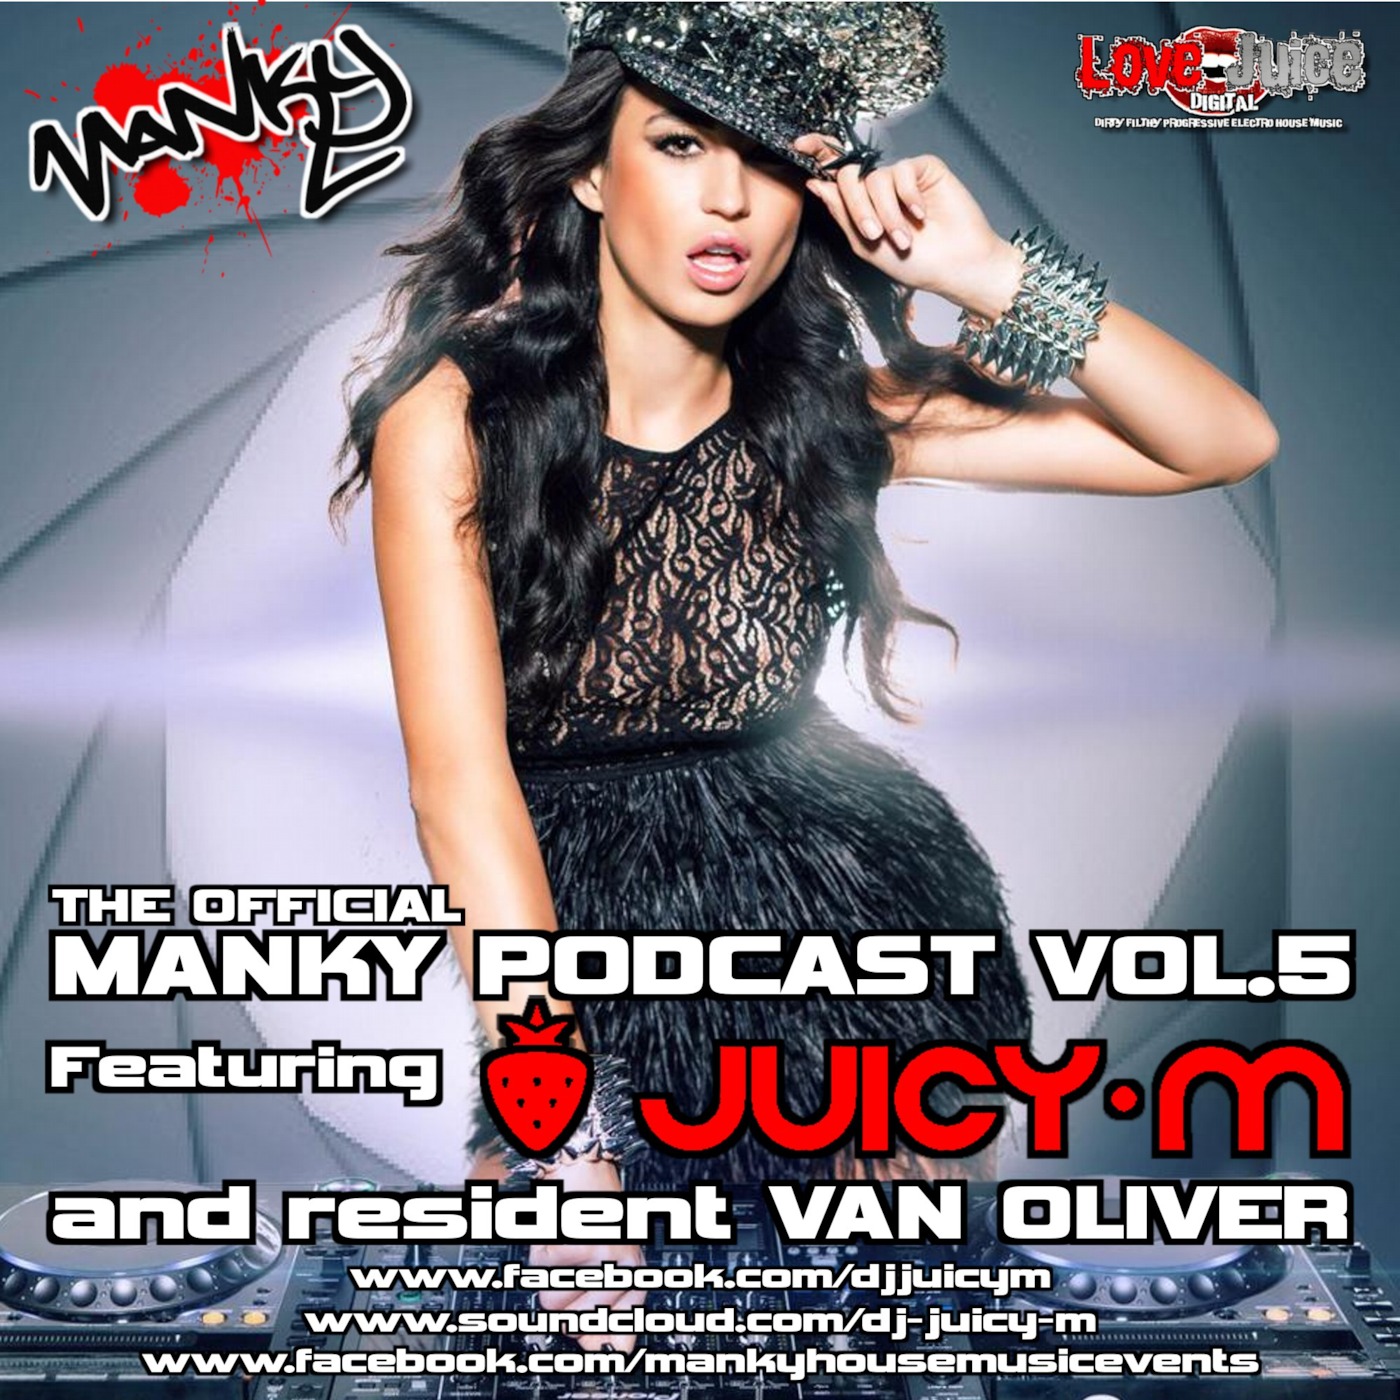 The Official Manky Podcasts with Van Oliver